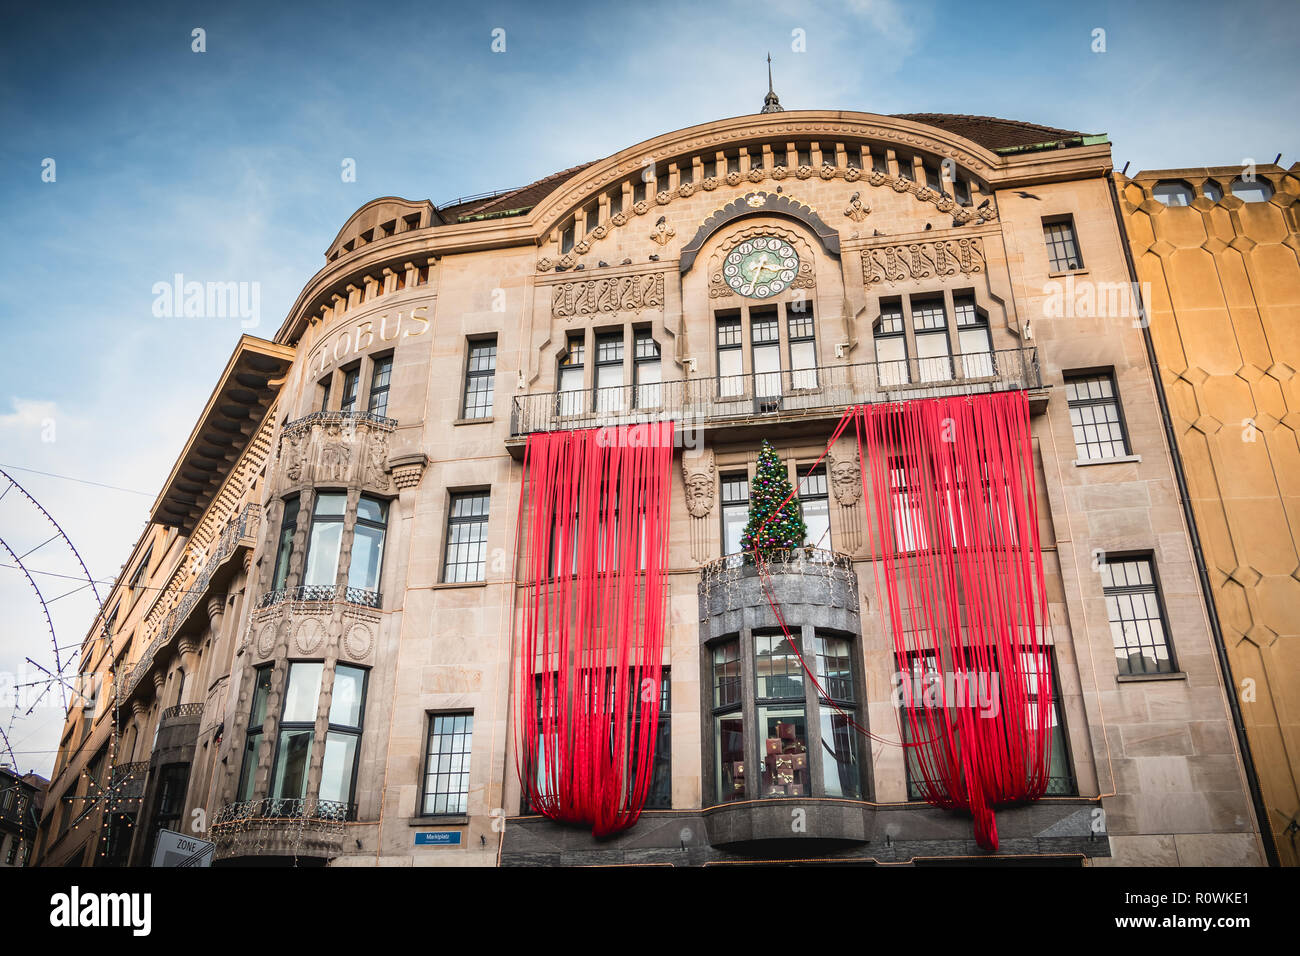 Basel, Switzerland - December 25, 2017 - Architectural detail of the Globus department store on the market square decorated for Christmas Stock Photo